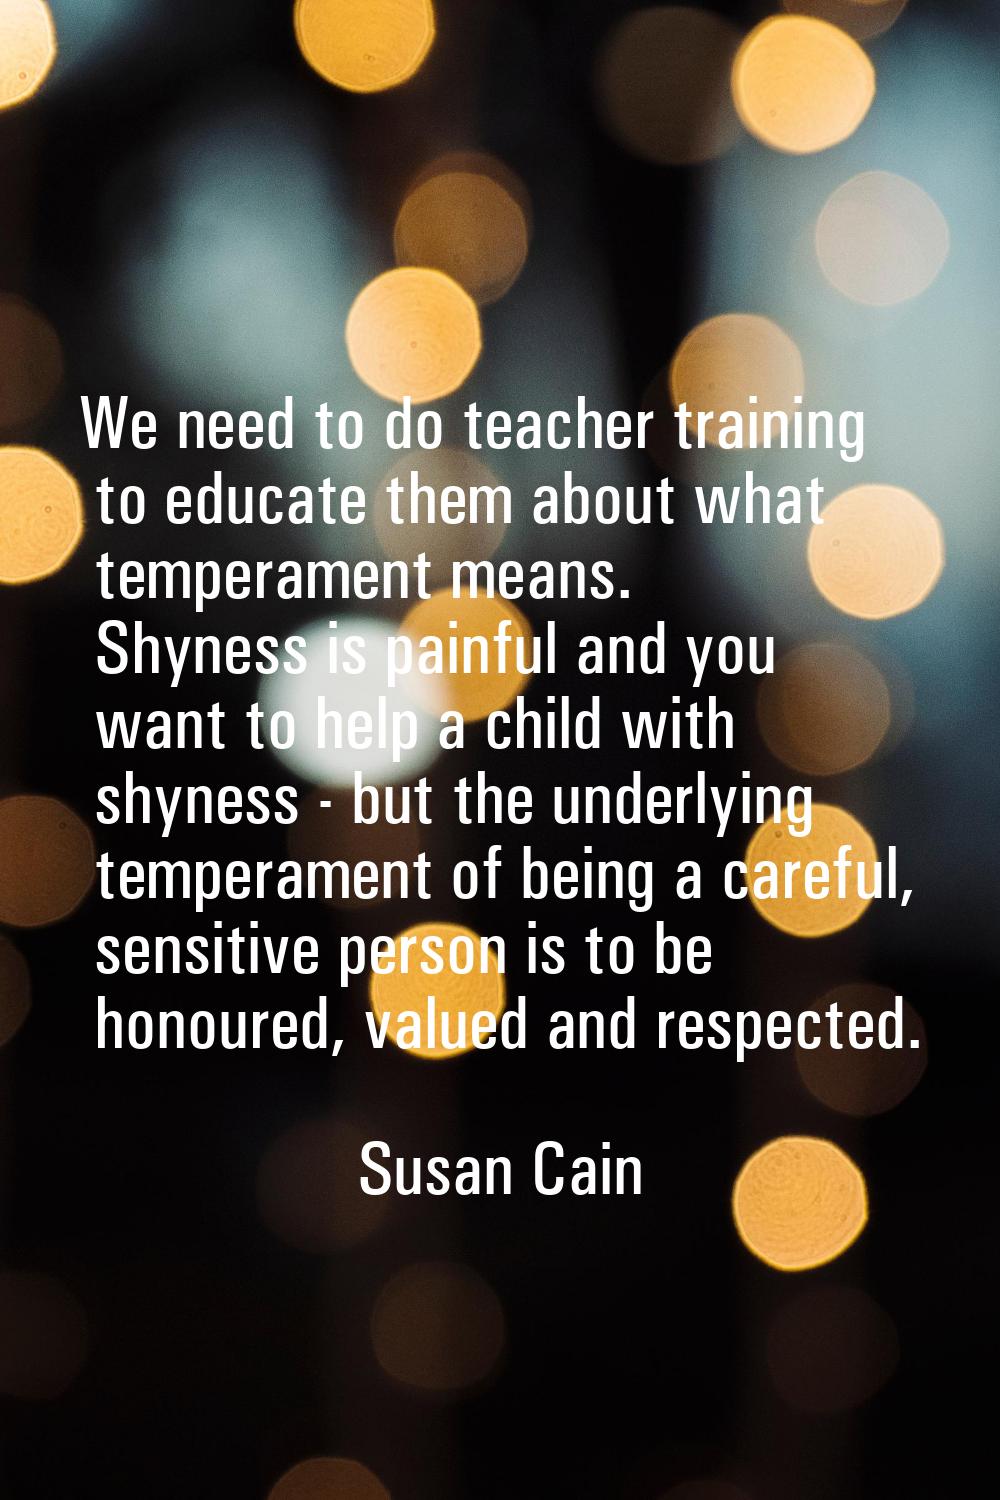 We need to do teacher training to educate them about what temperament means. Shyness is painful and